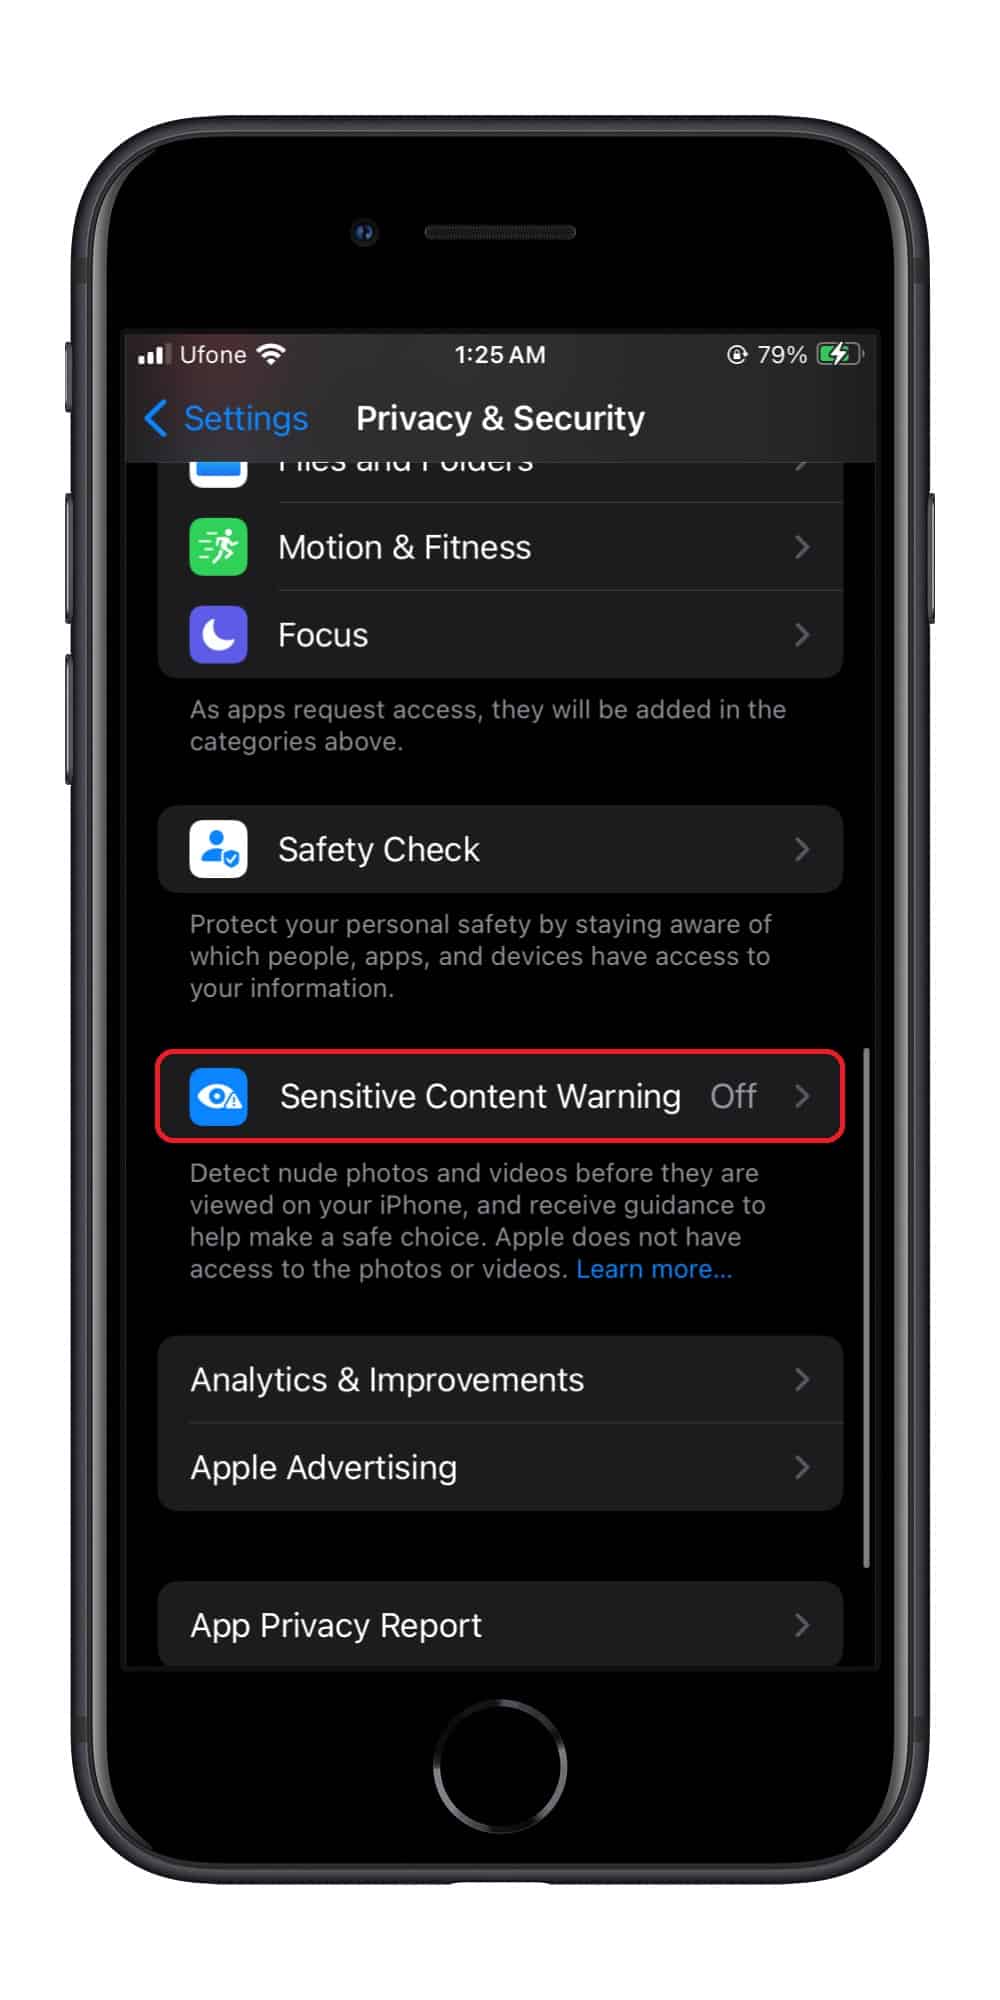 How to enable Sensitive Content Warnings in iOS 17